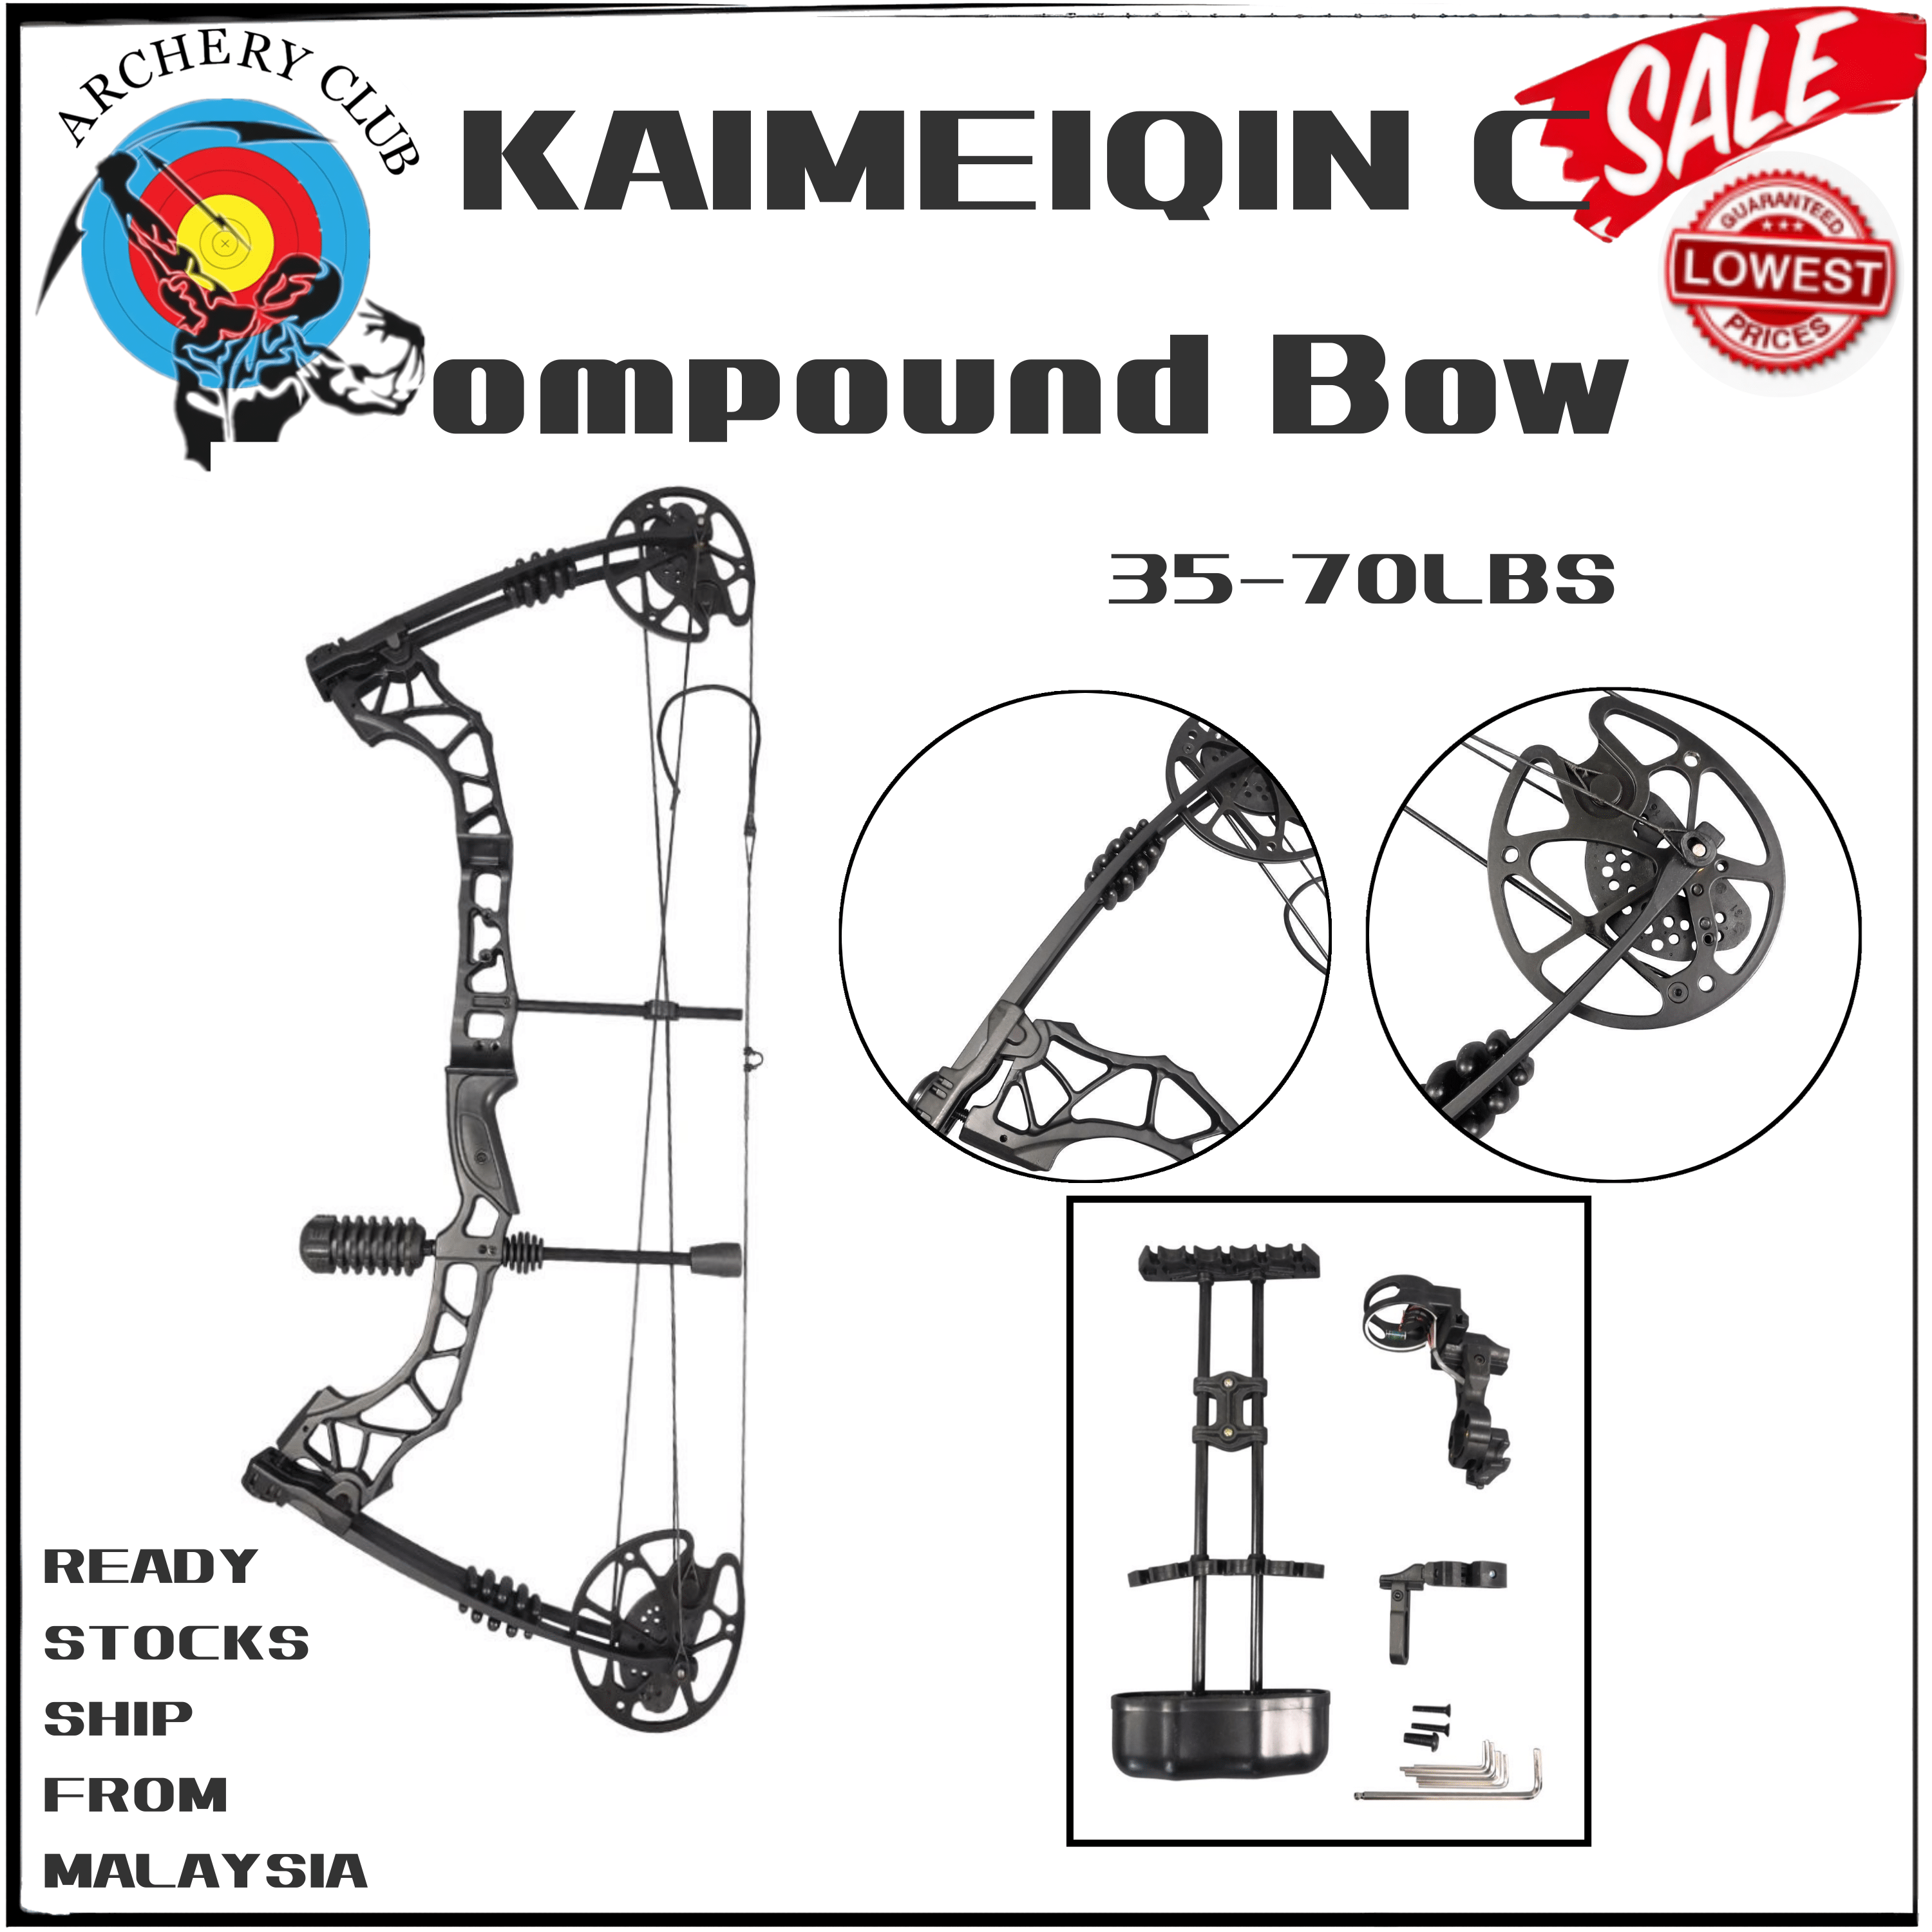 【Delivery Locally】KAIMEIQIN Compound Bow 35-70 LBS